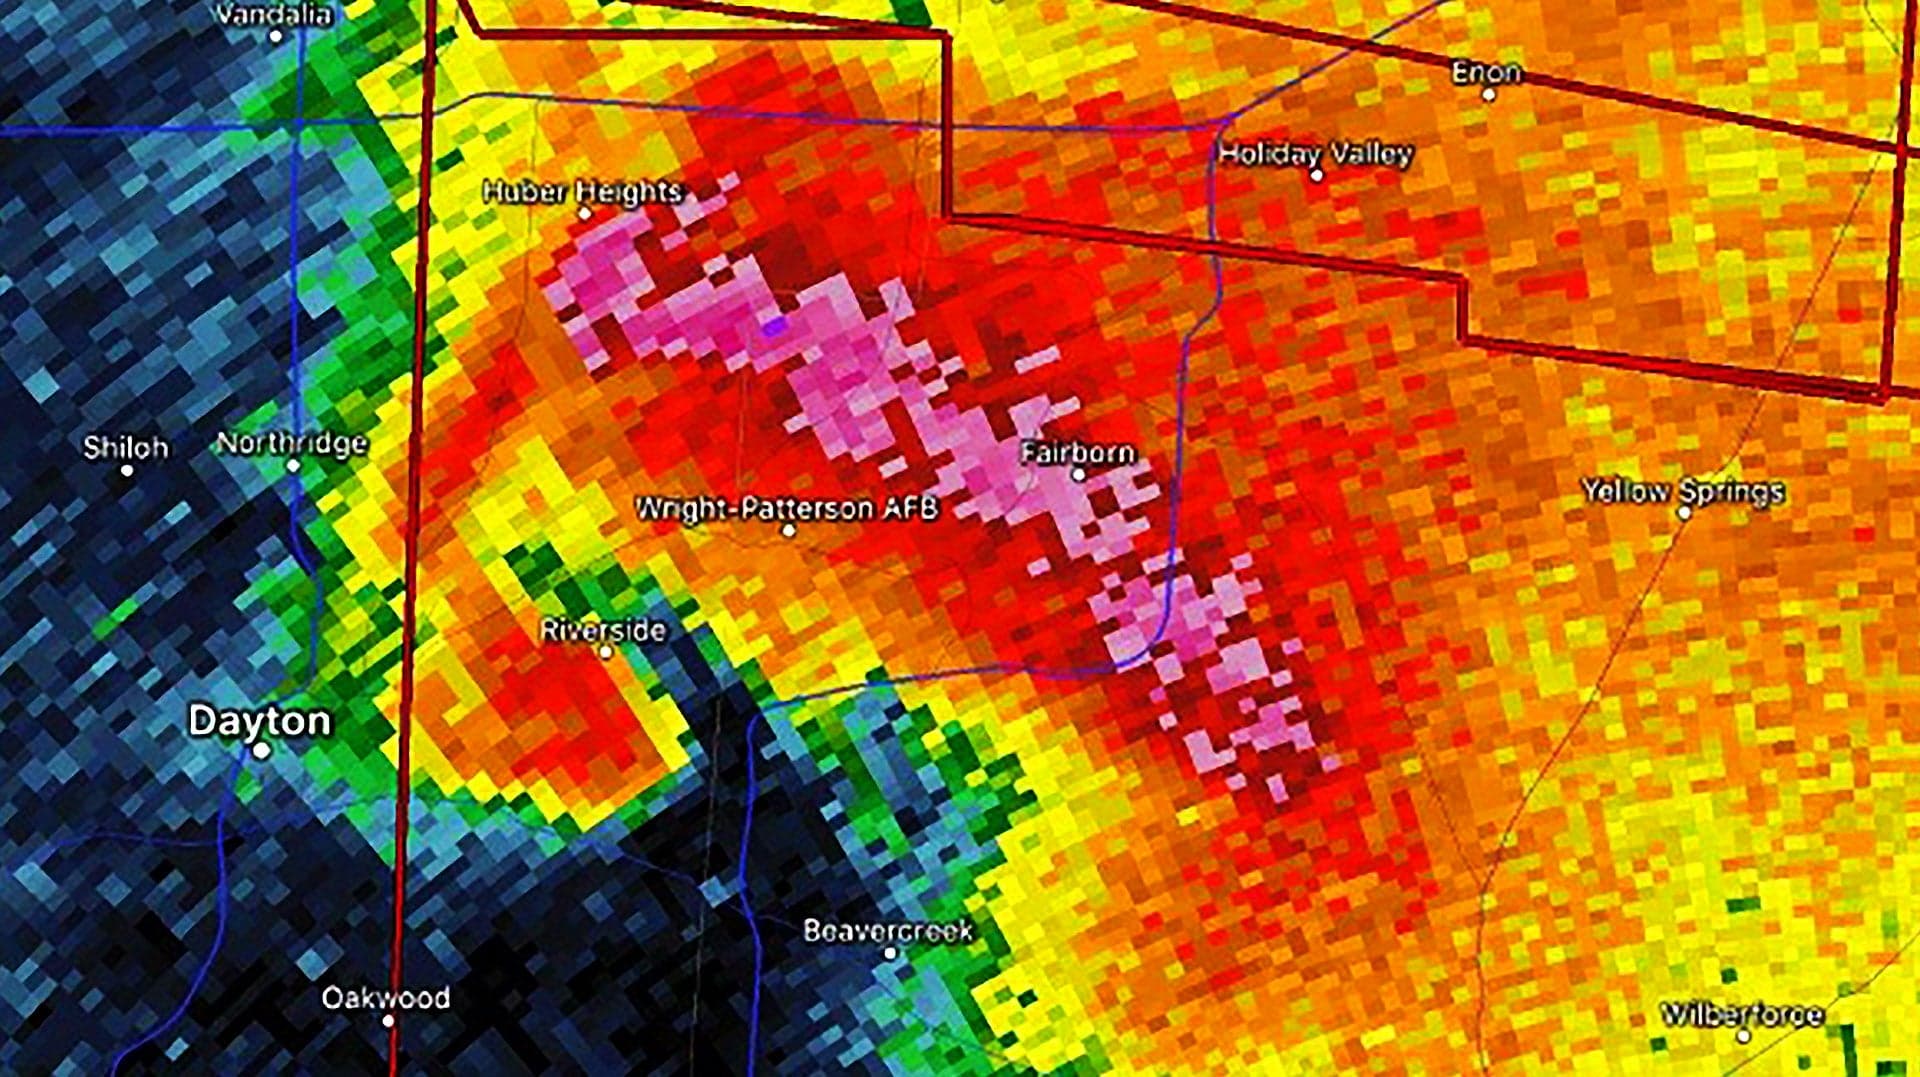 A Tornado Touched Down On Or Very Near Wright Patterson Air Force Base In Ohio (Updated)